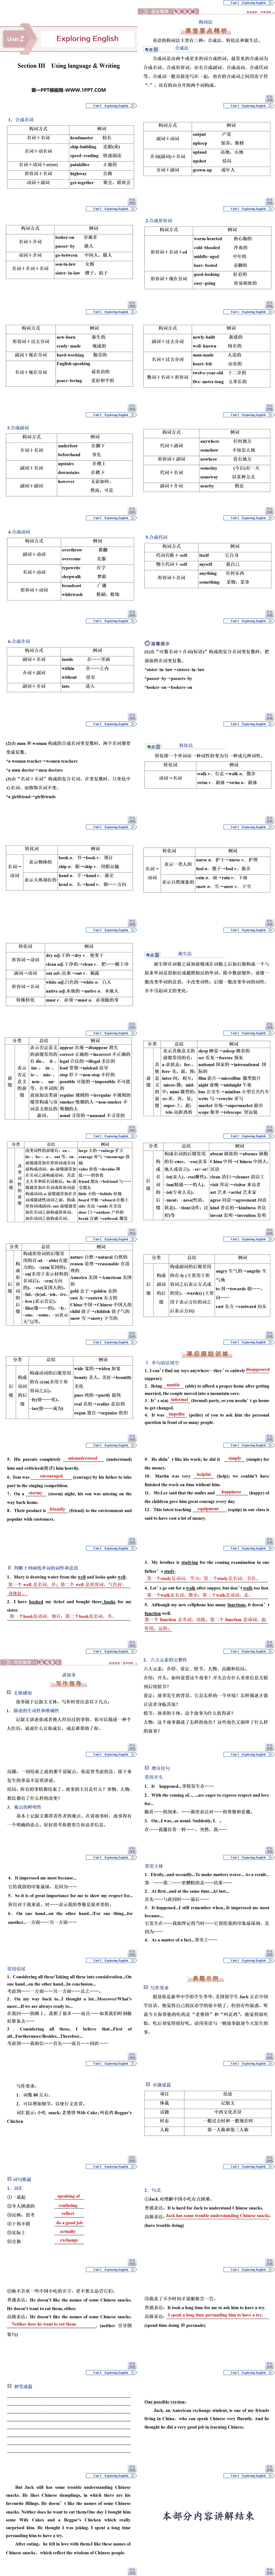 《Exploring English》Section ⅢPPT下载
（2）